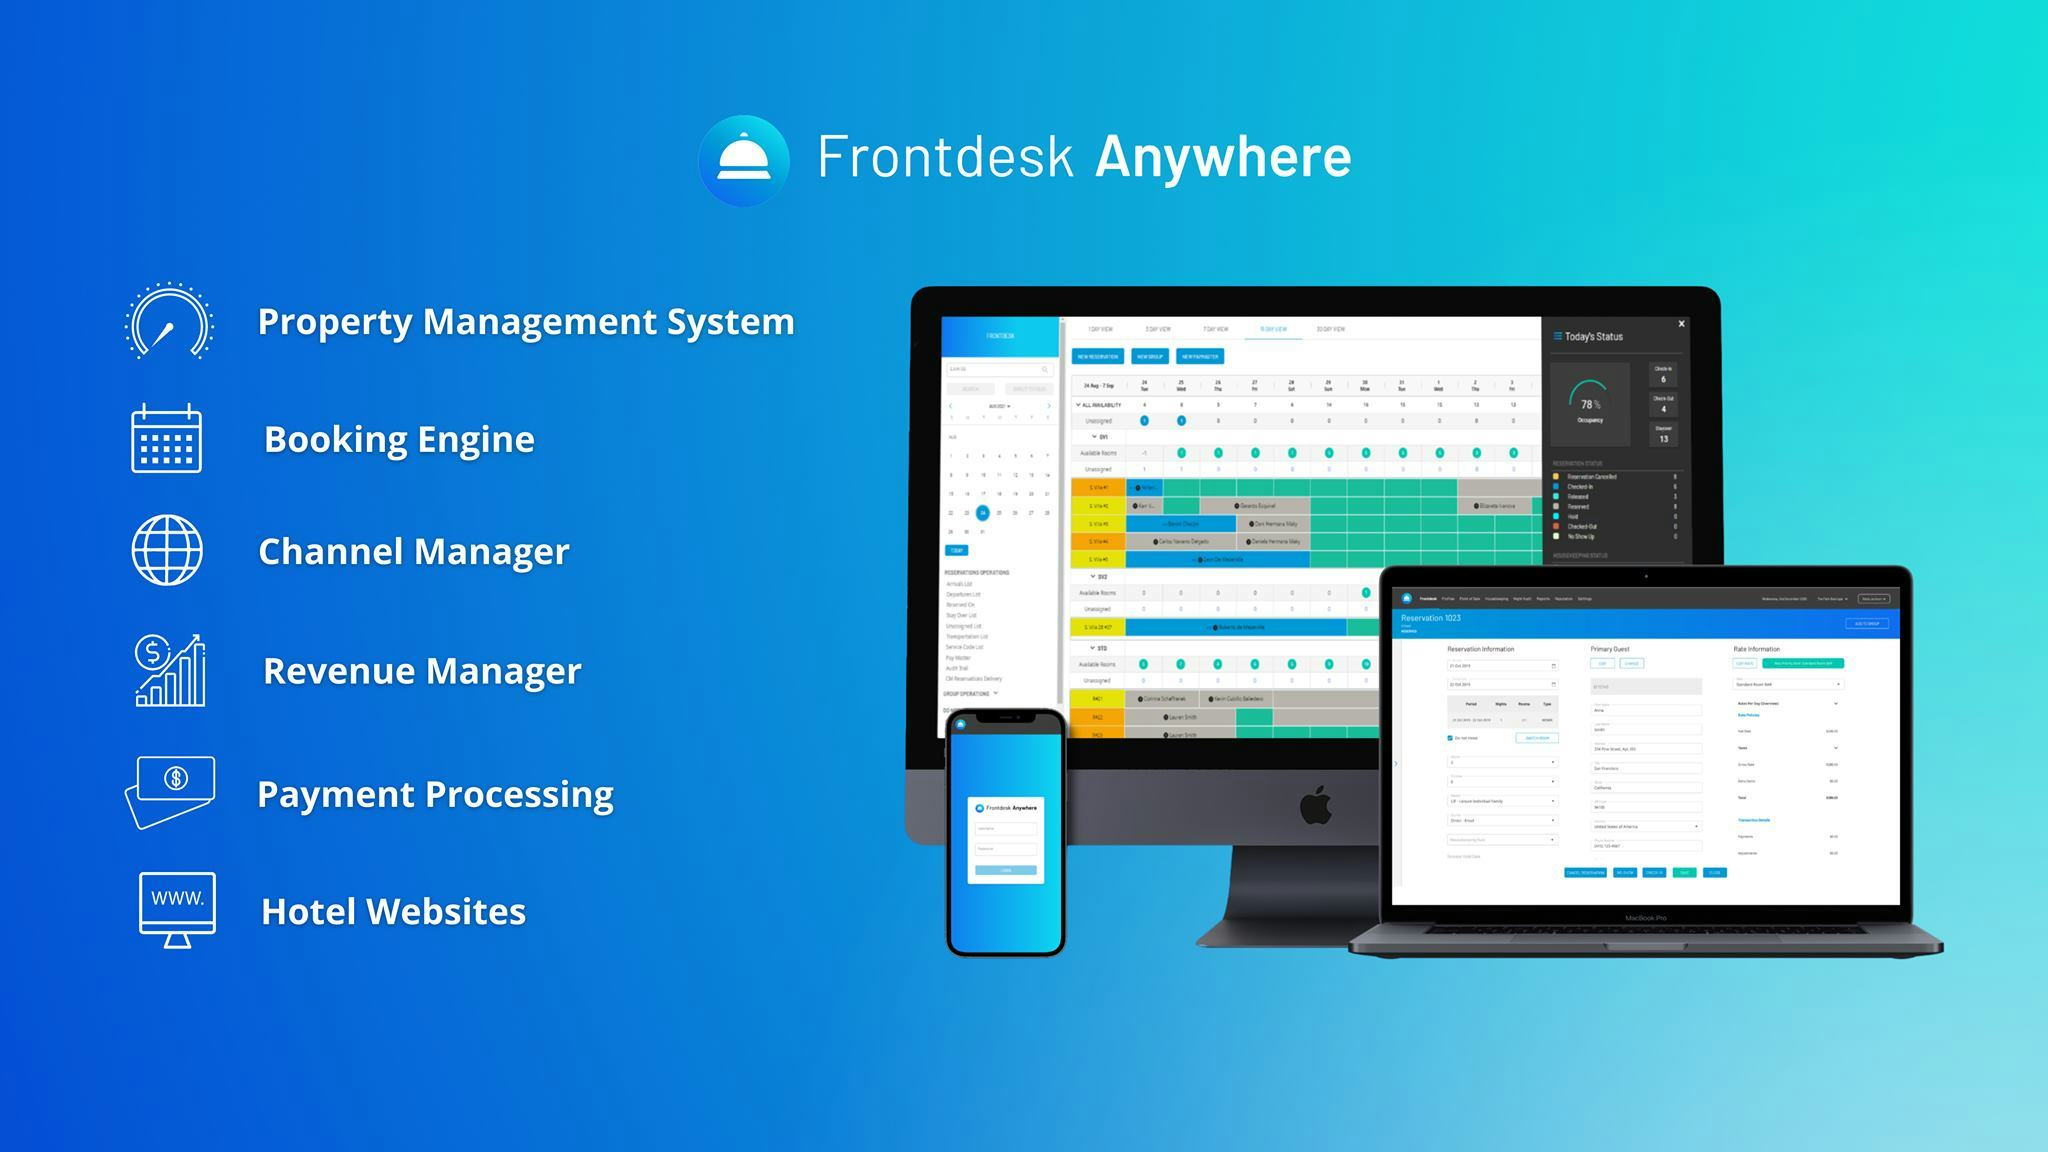 Frontdesk Anywhere